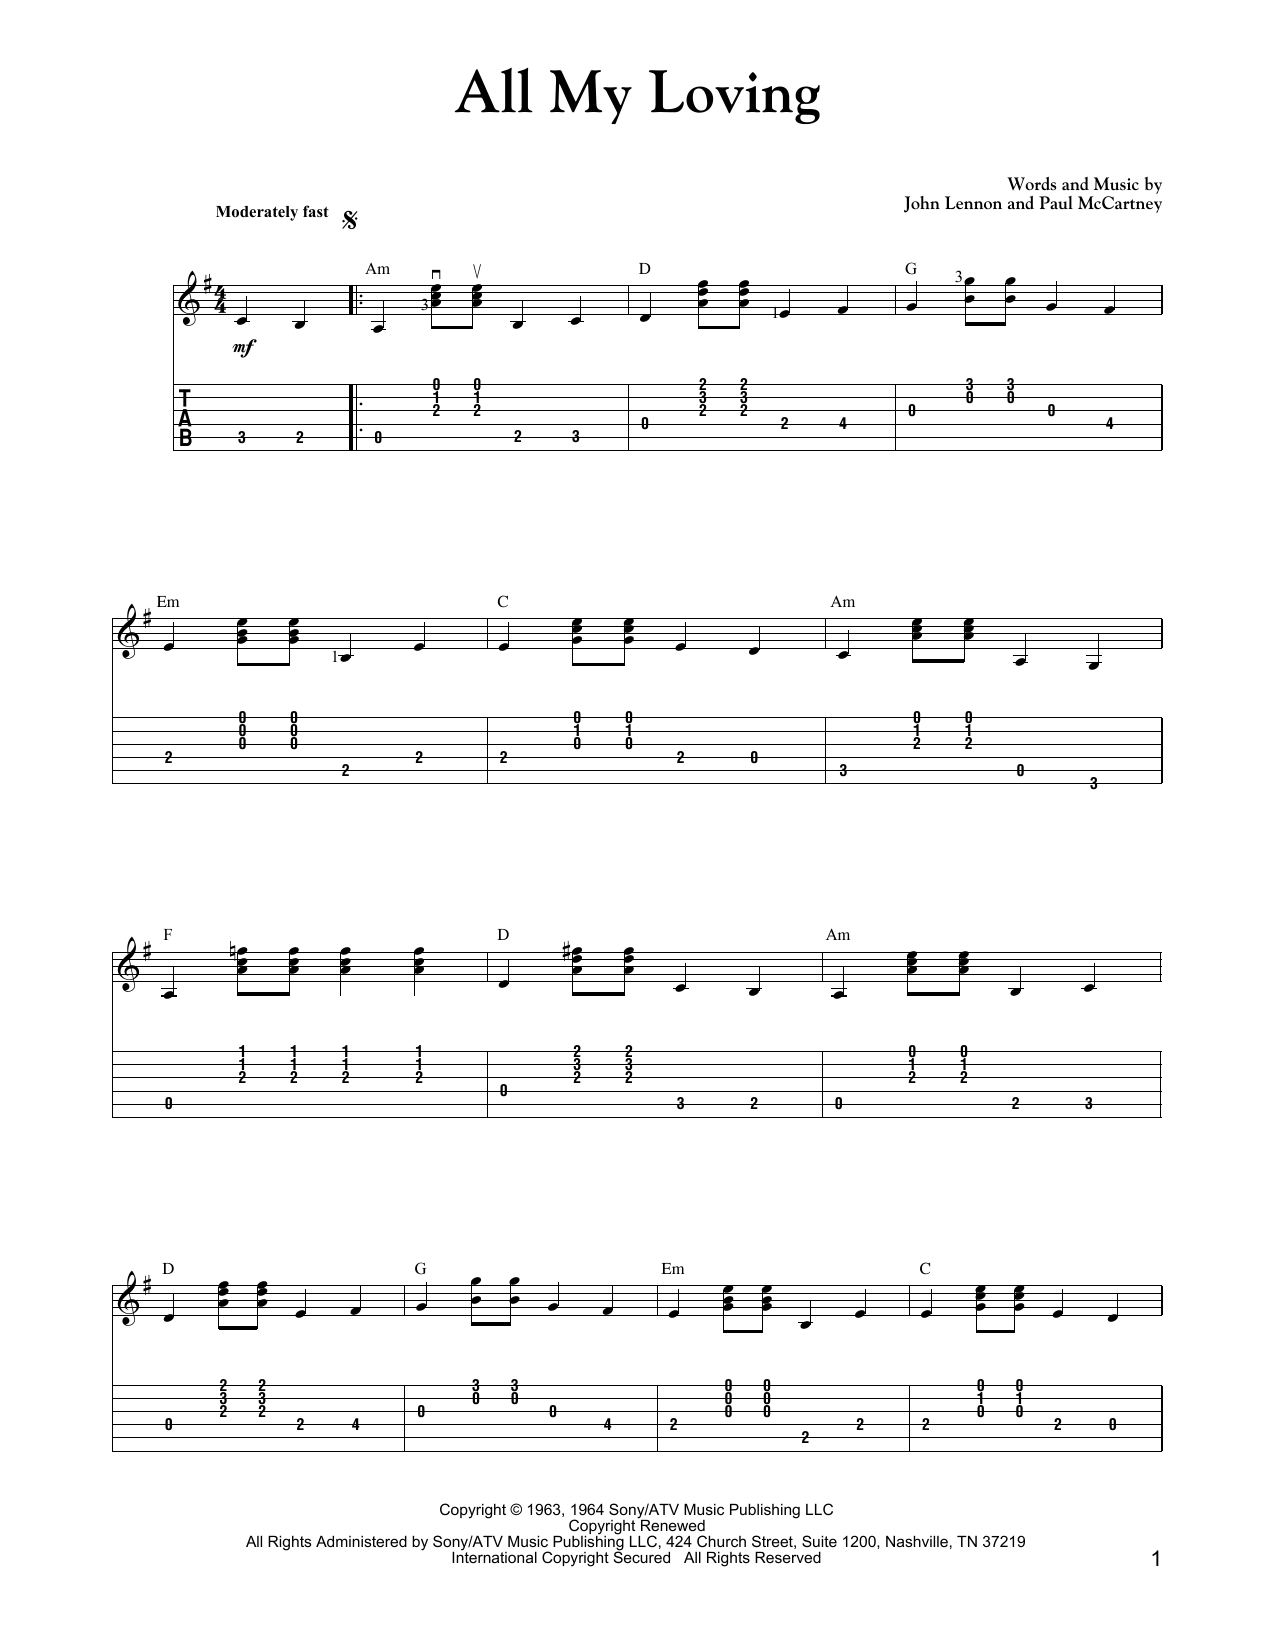 Download Carter Style Guitar All My Loving Sheet Music